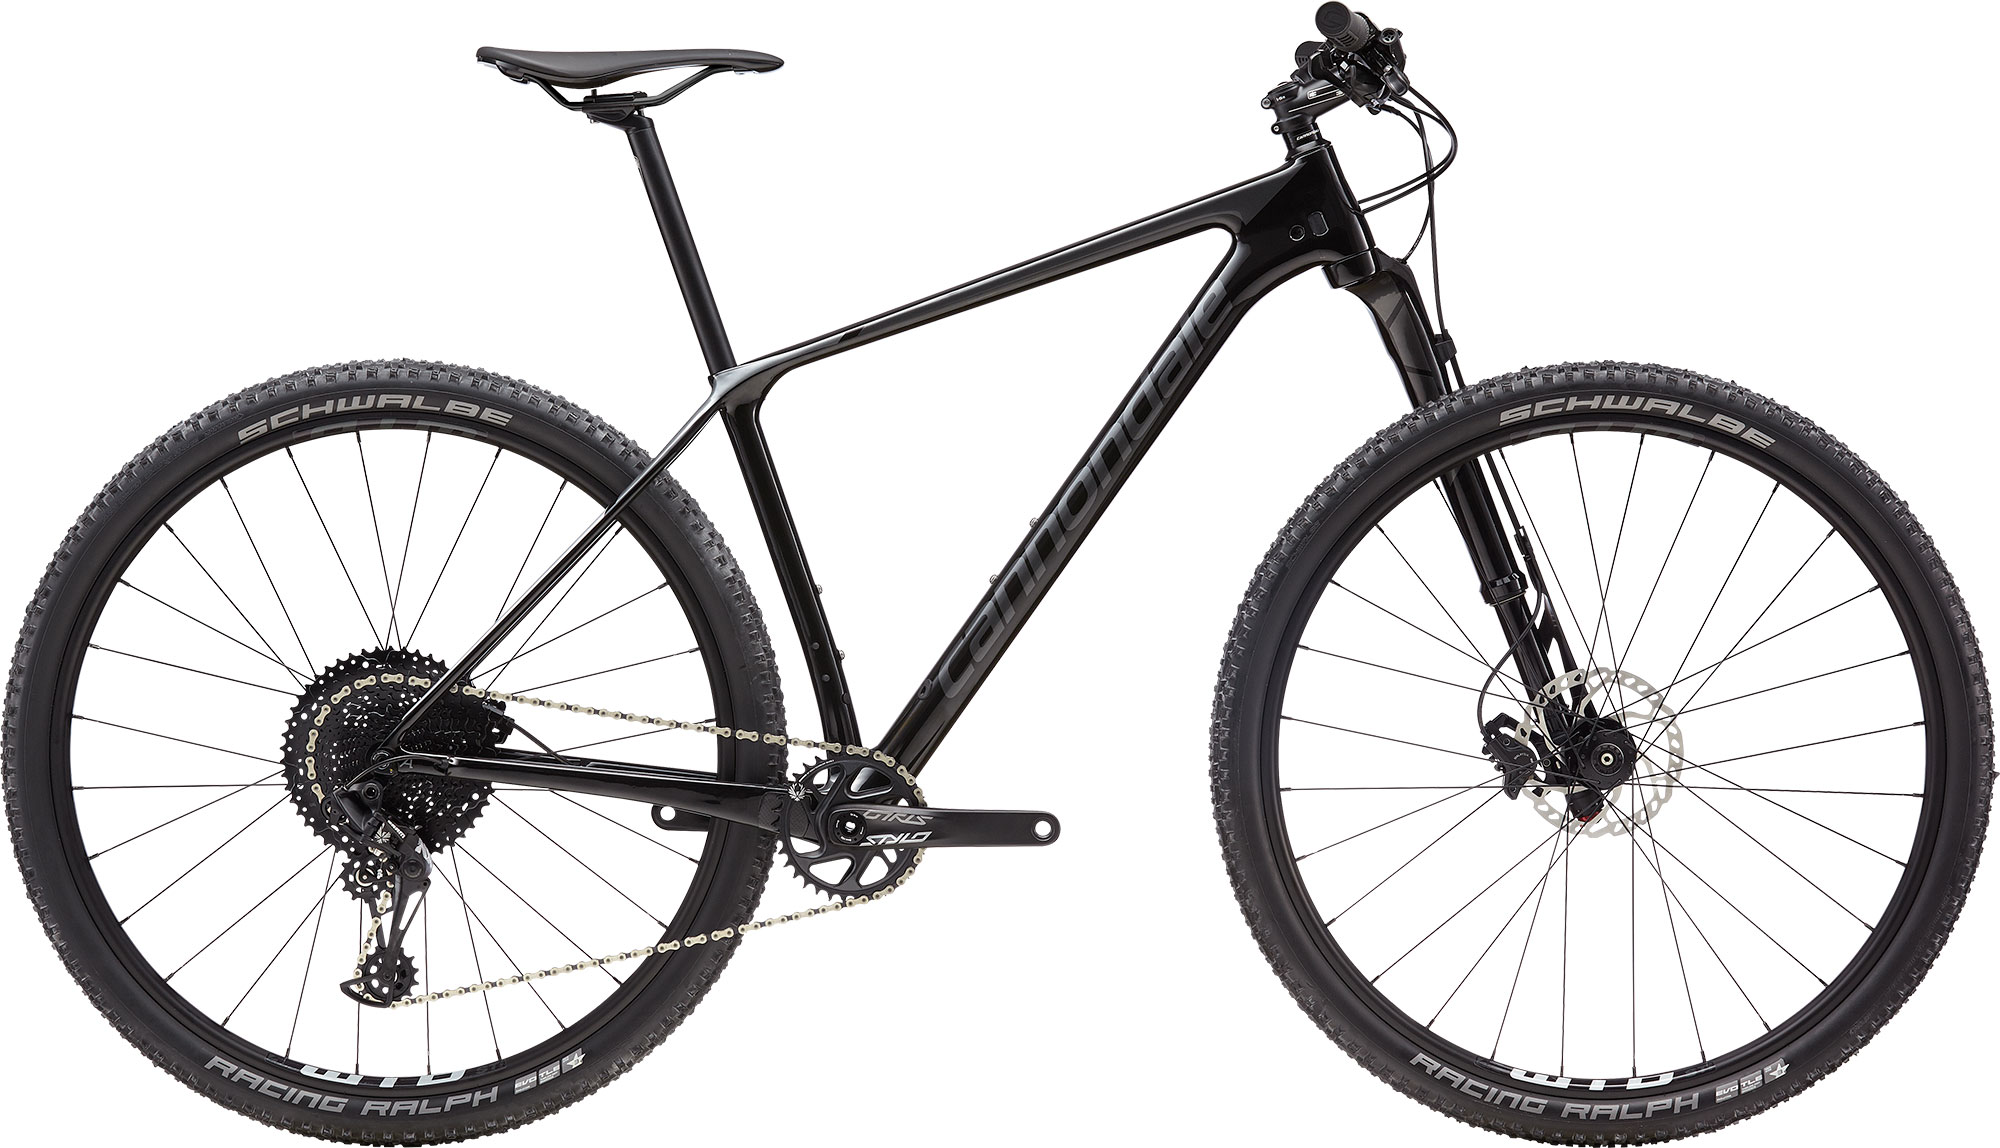 Велосипед 29" Cannondale F-SI Carbon 4 рама - M 2019 GRY серый